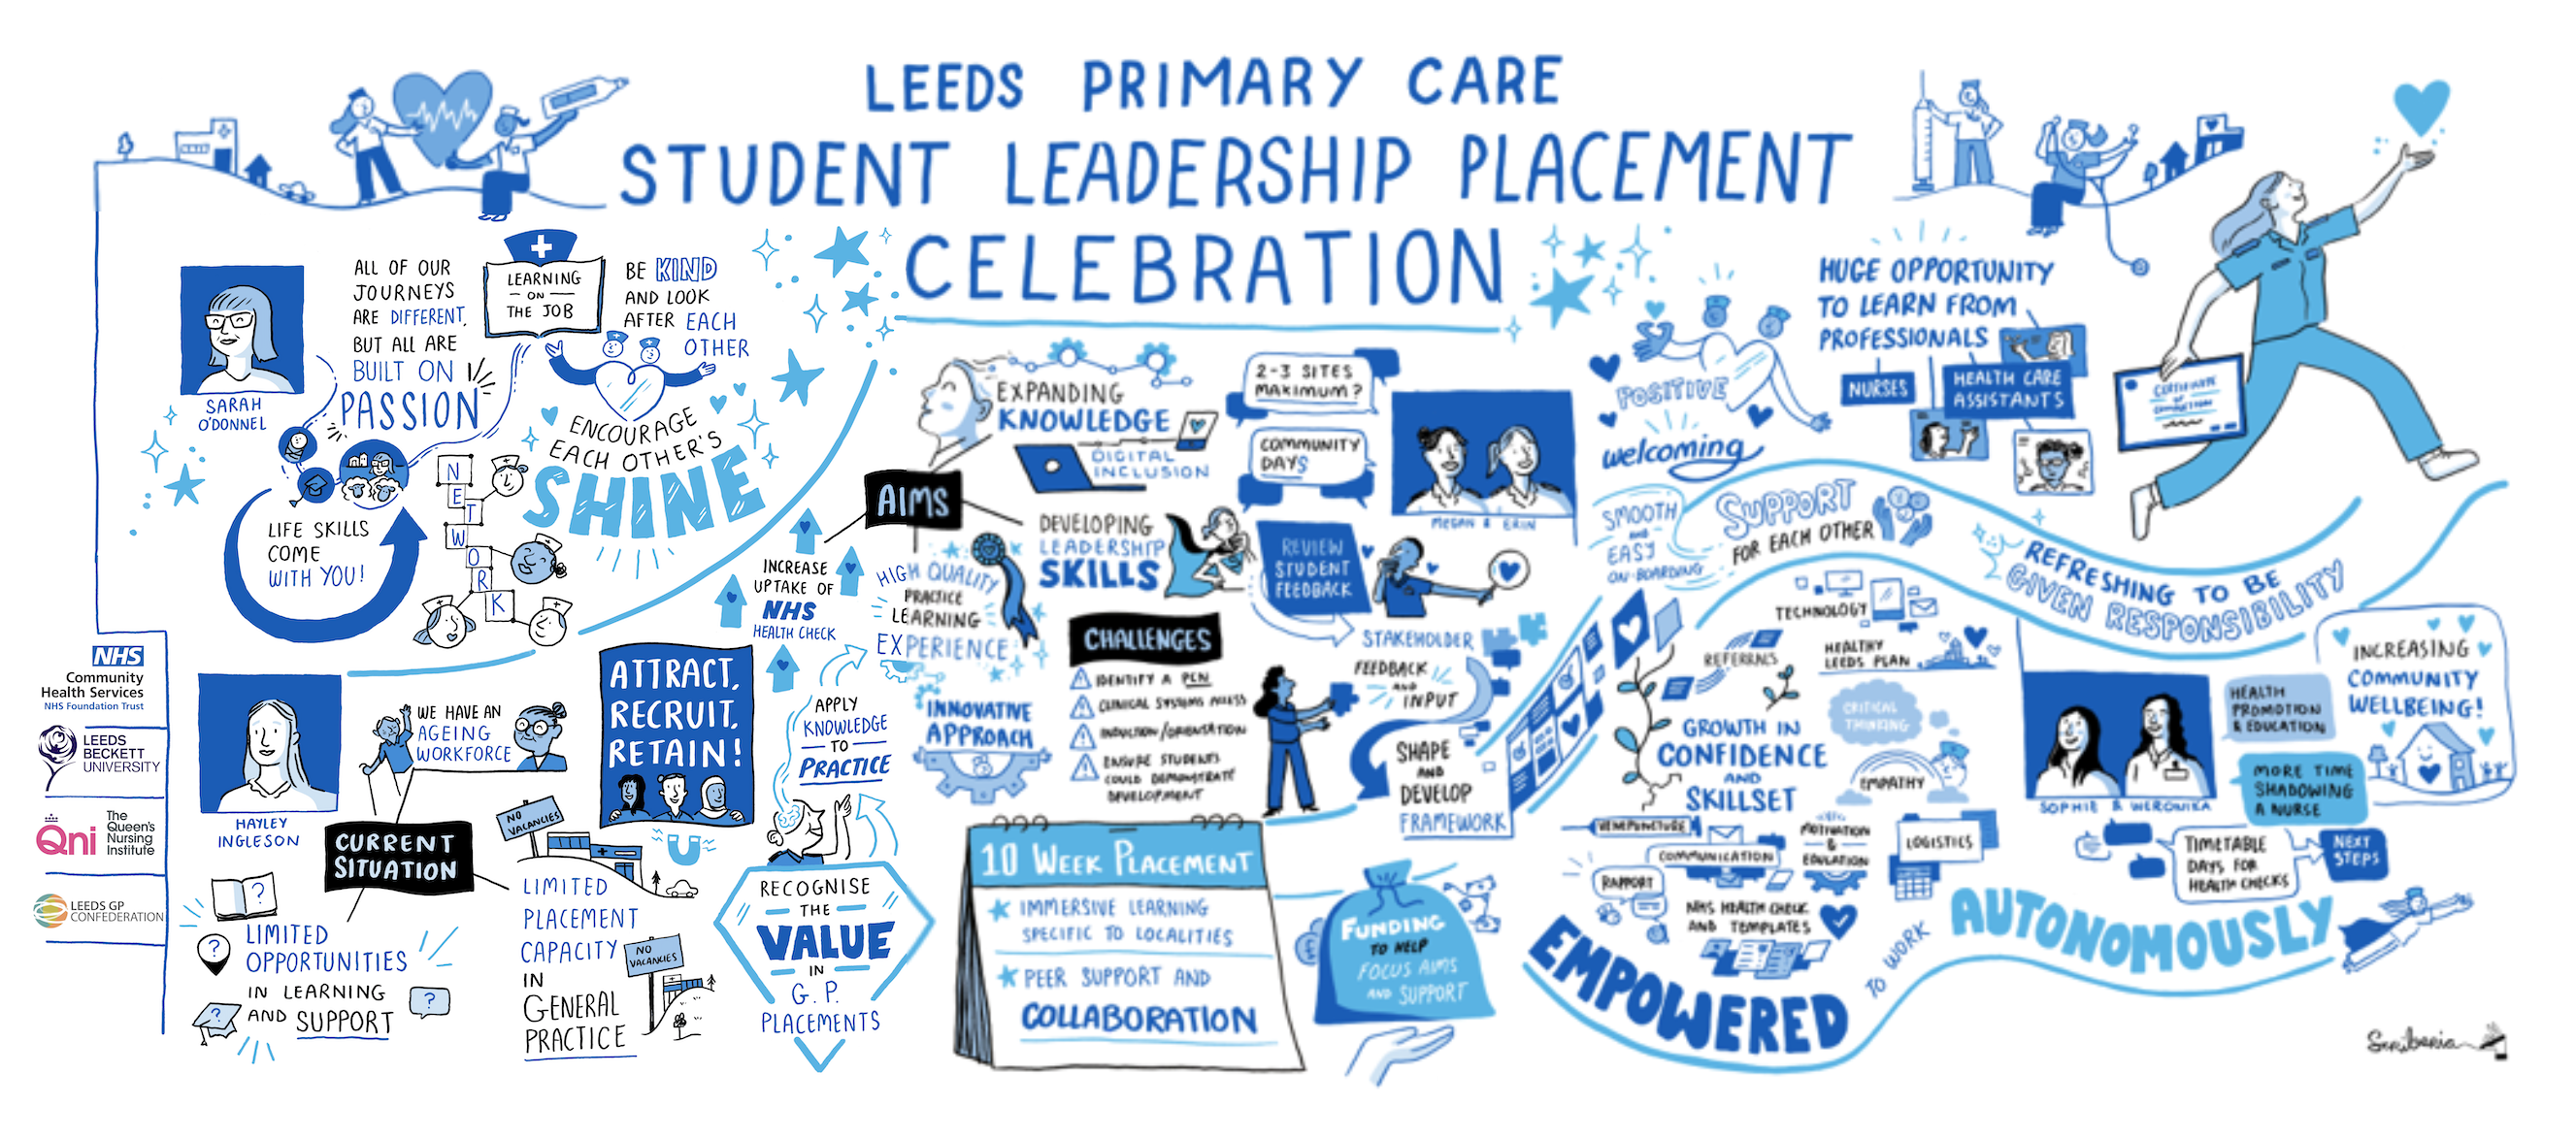 ‘Leeds primary care student leadership placement’ featured image